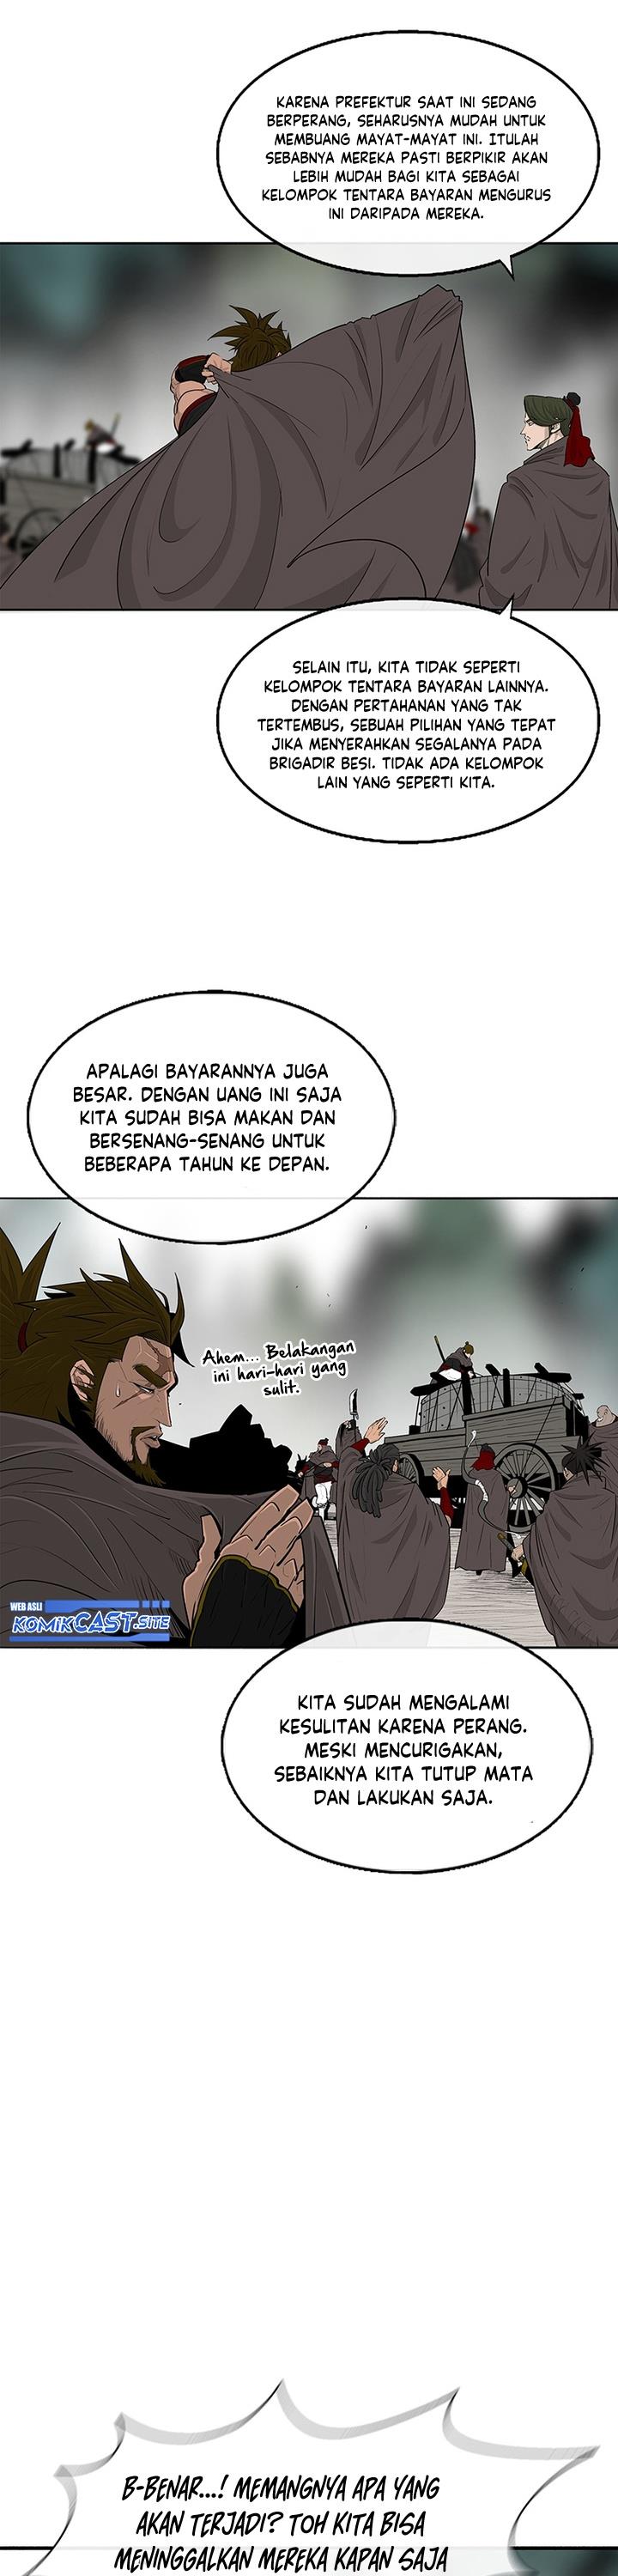 Legend of the Northern Blade Chapter 154